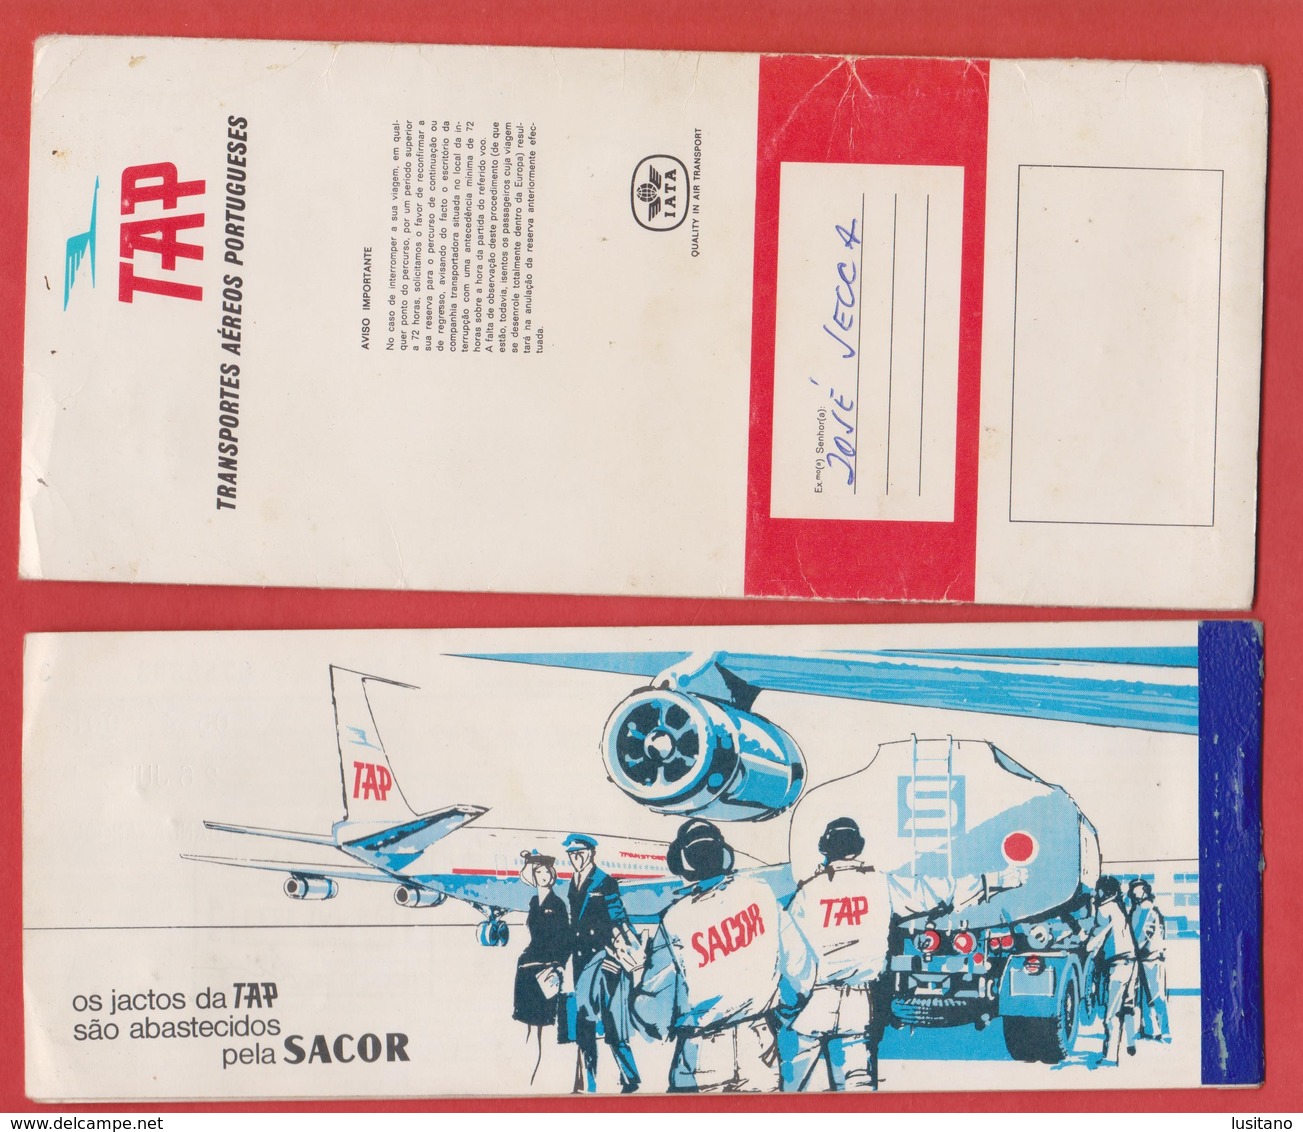 Aviation - Ticket Tap Air Portugal And Original Airlines Cover - Lisboa To Luanda Angola - 1971 - Europe